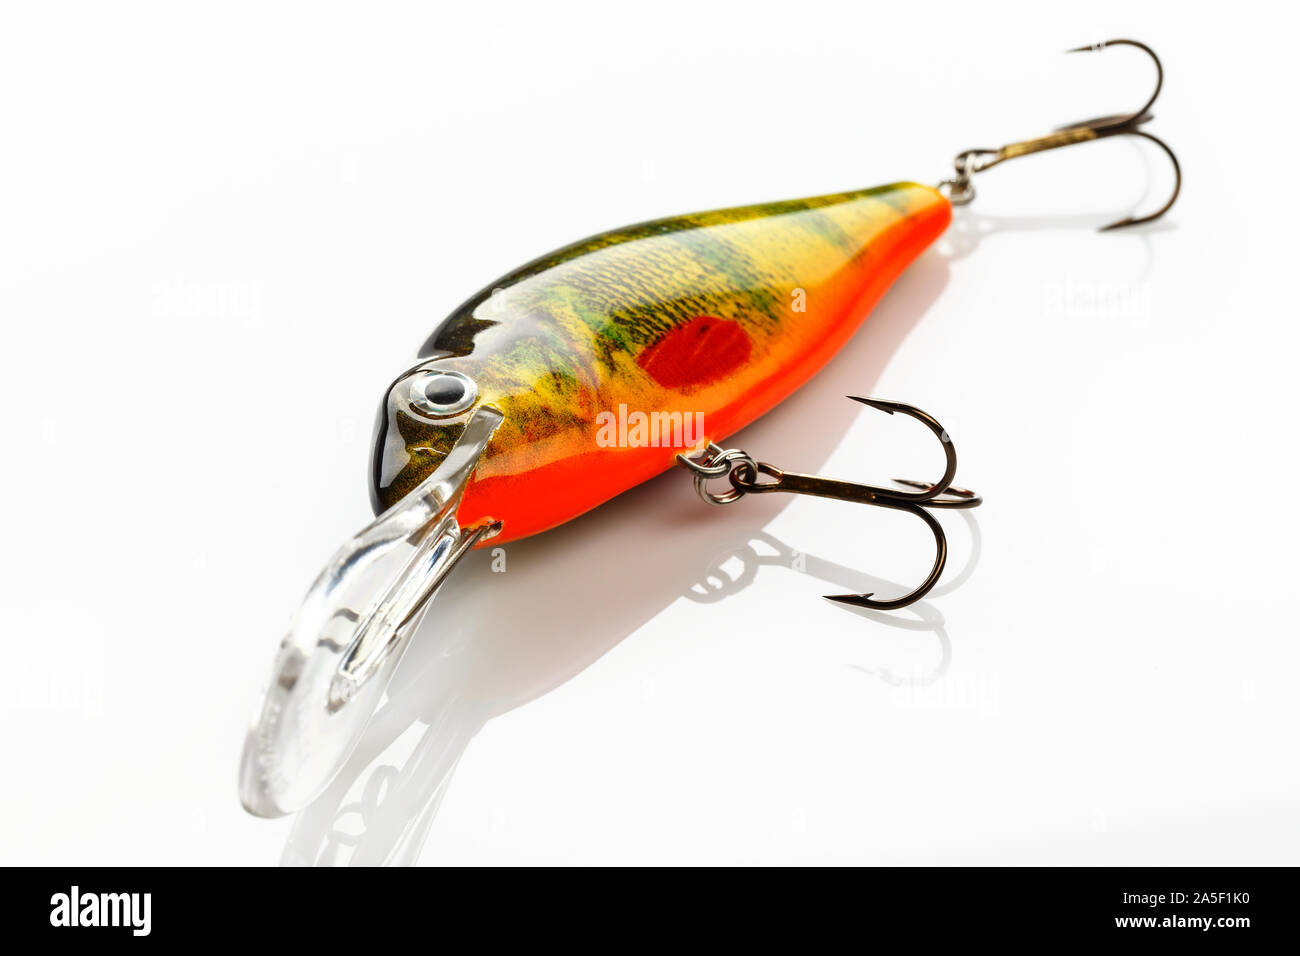 Fishing bait tackle and baubles for fishing on a white background ...